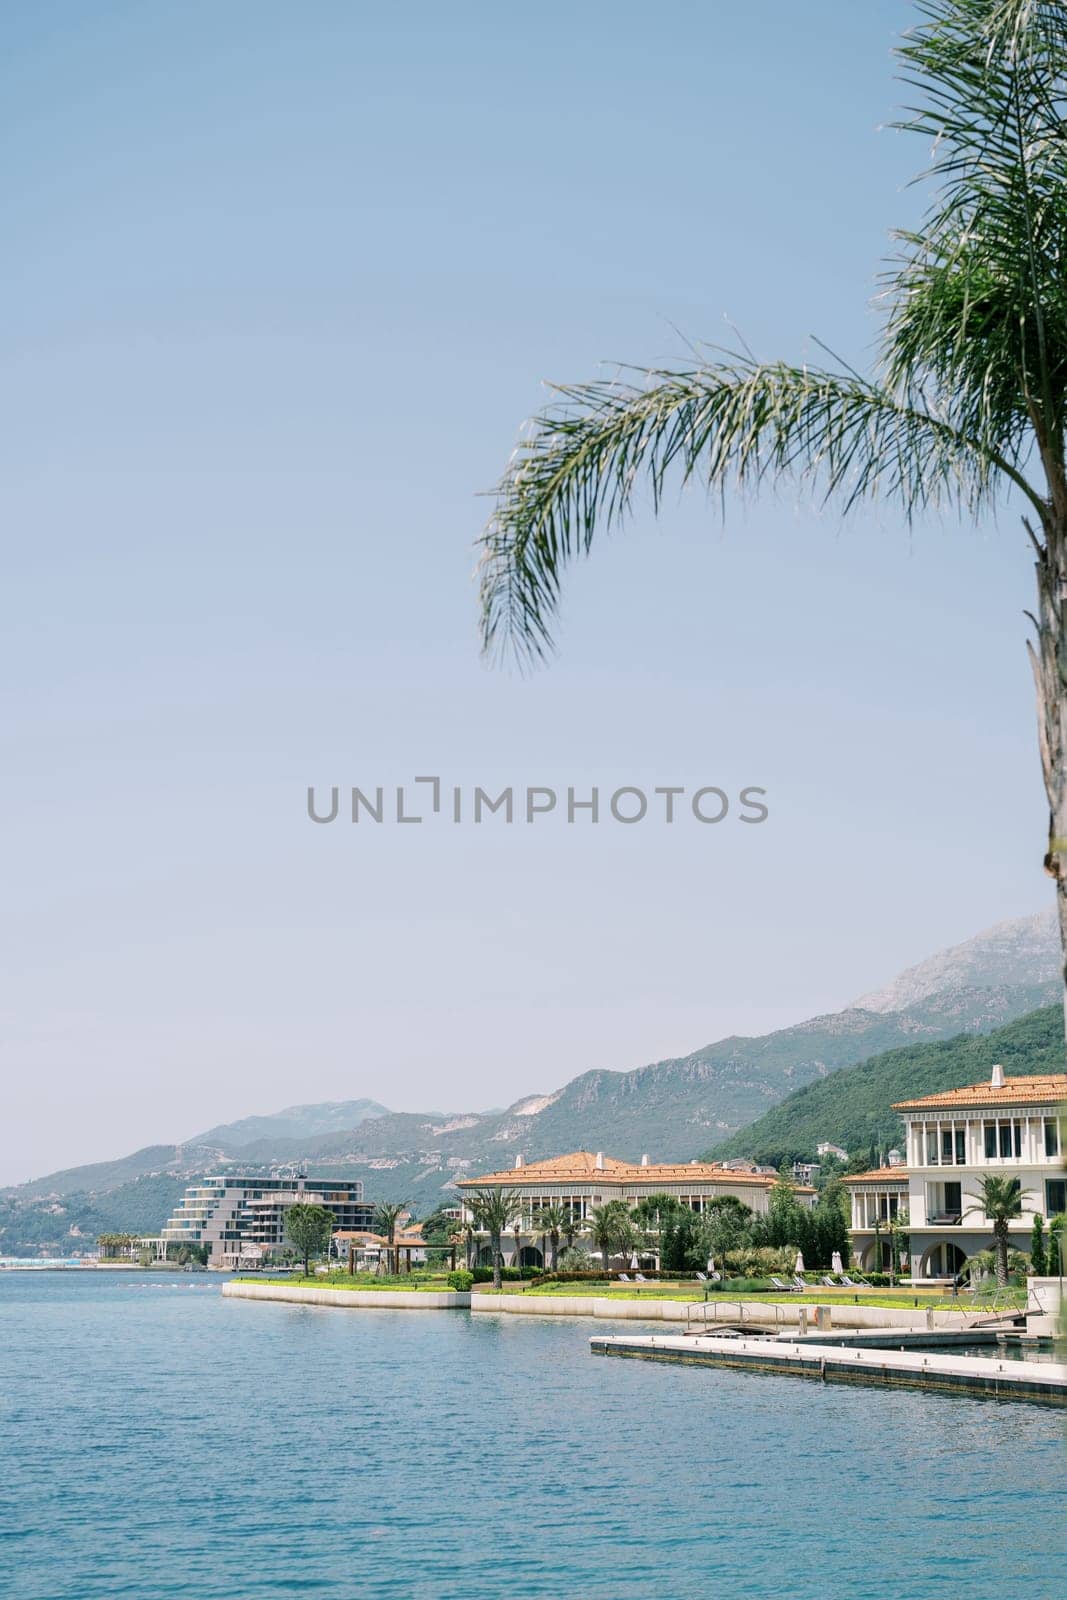 One and Only hotel complex on the seashore at the foot of the mountains. Portonovi, Montenegro by Nadtochiy